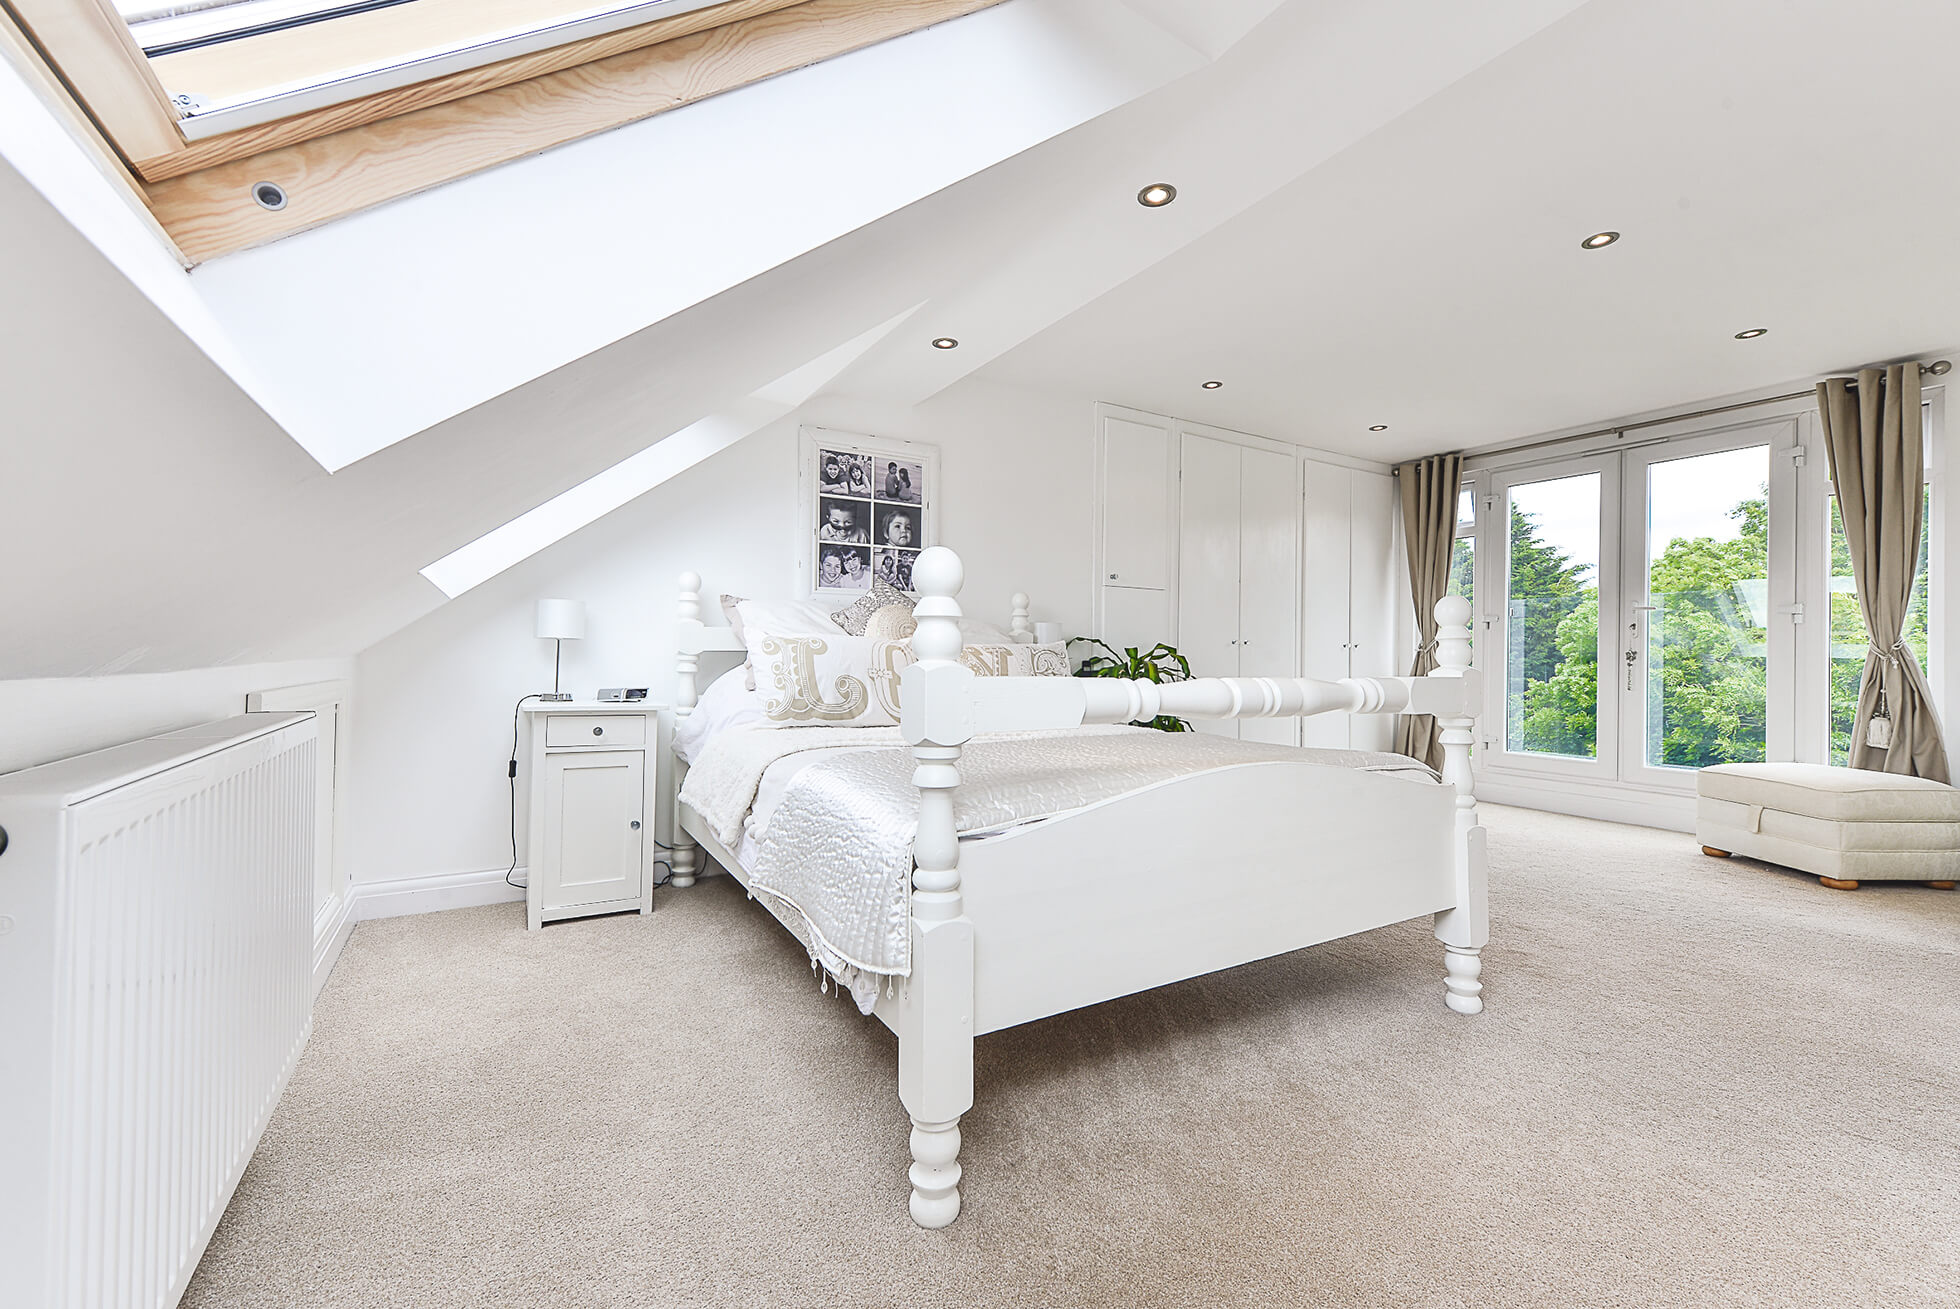 Do you have a question about converting your Loft in Dacorum? Here are the most popular questions asked by our clients.